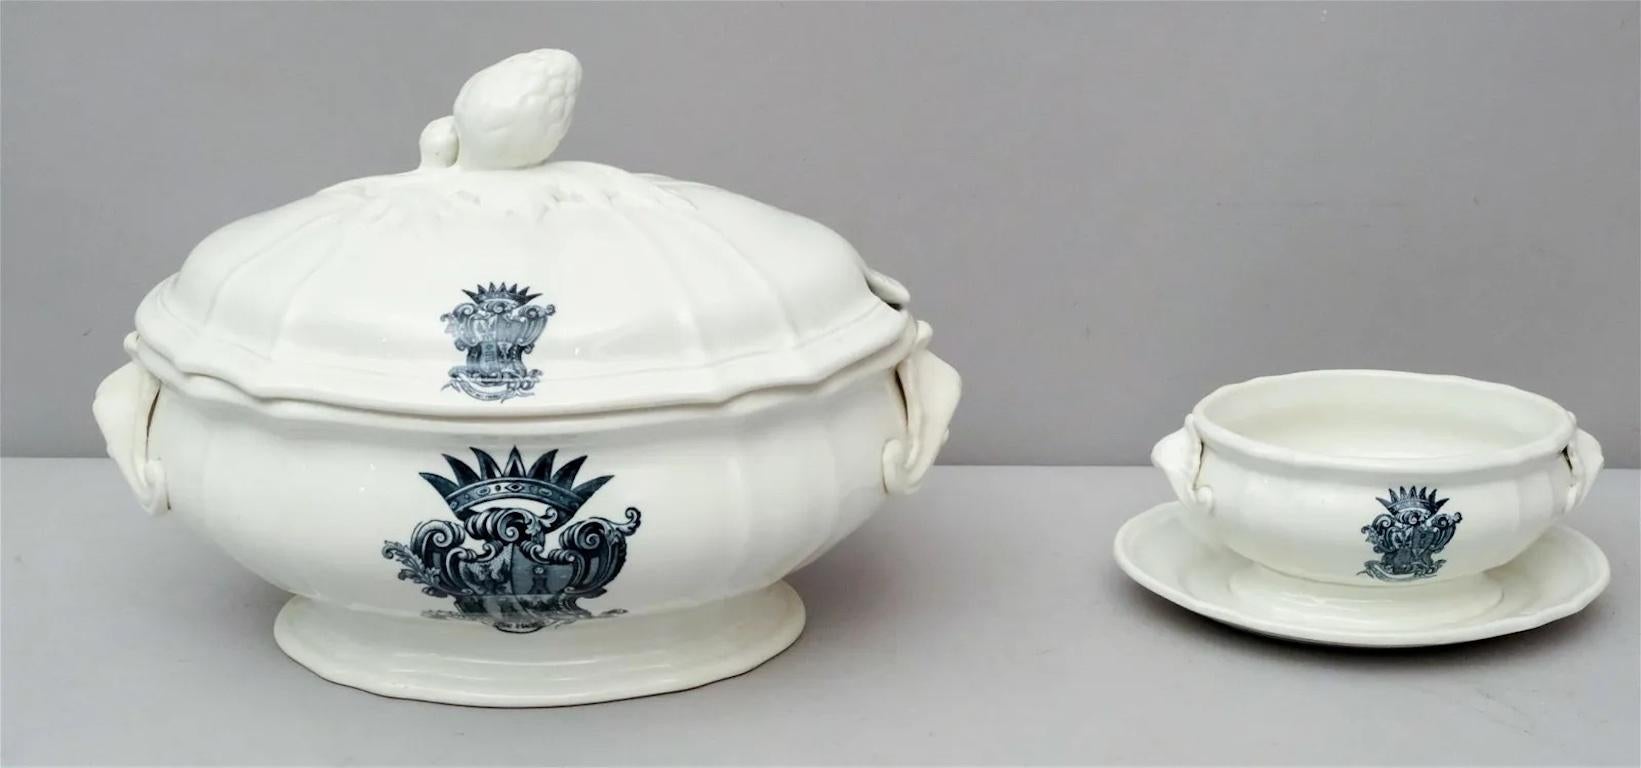 Baroque Revival 19th Century Ginori Armorial Porcelain Serving Pieces Platters and Tureen